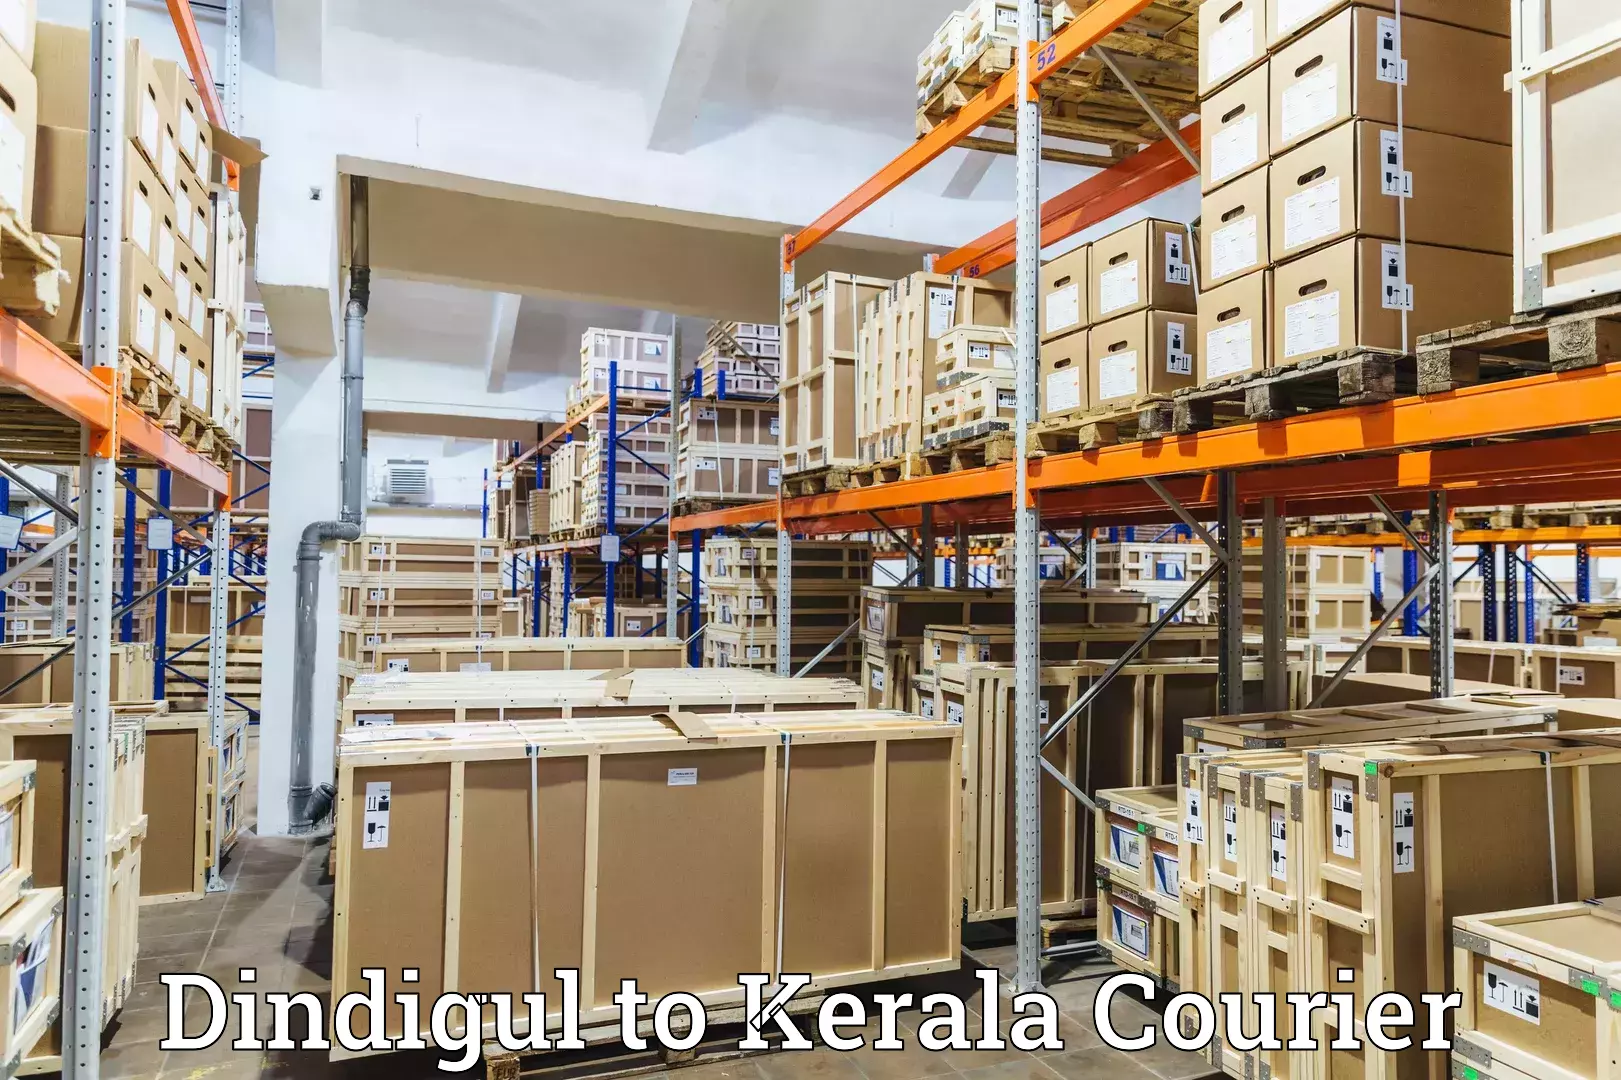 Same-day delivery options Dindigul to Iritty